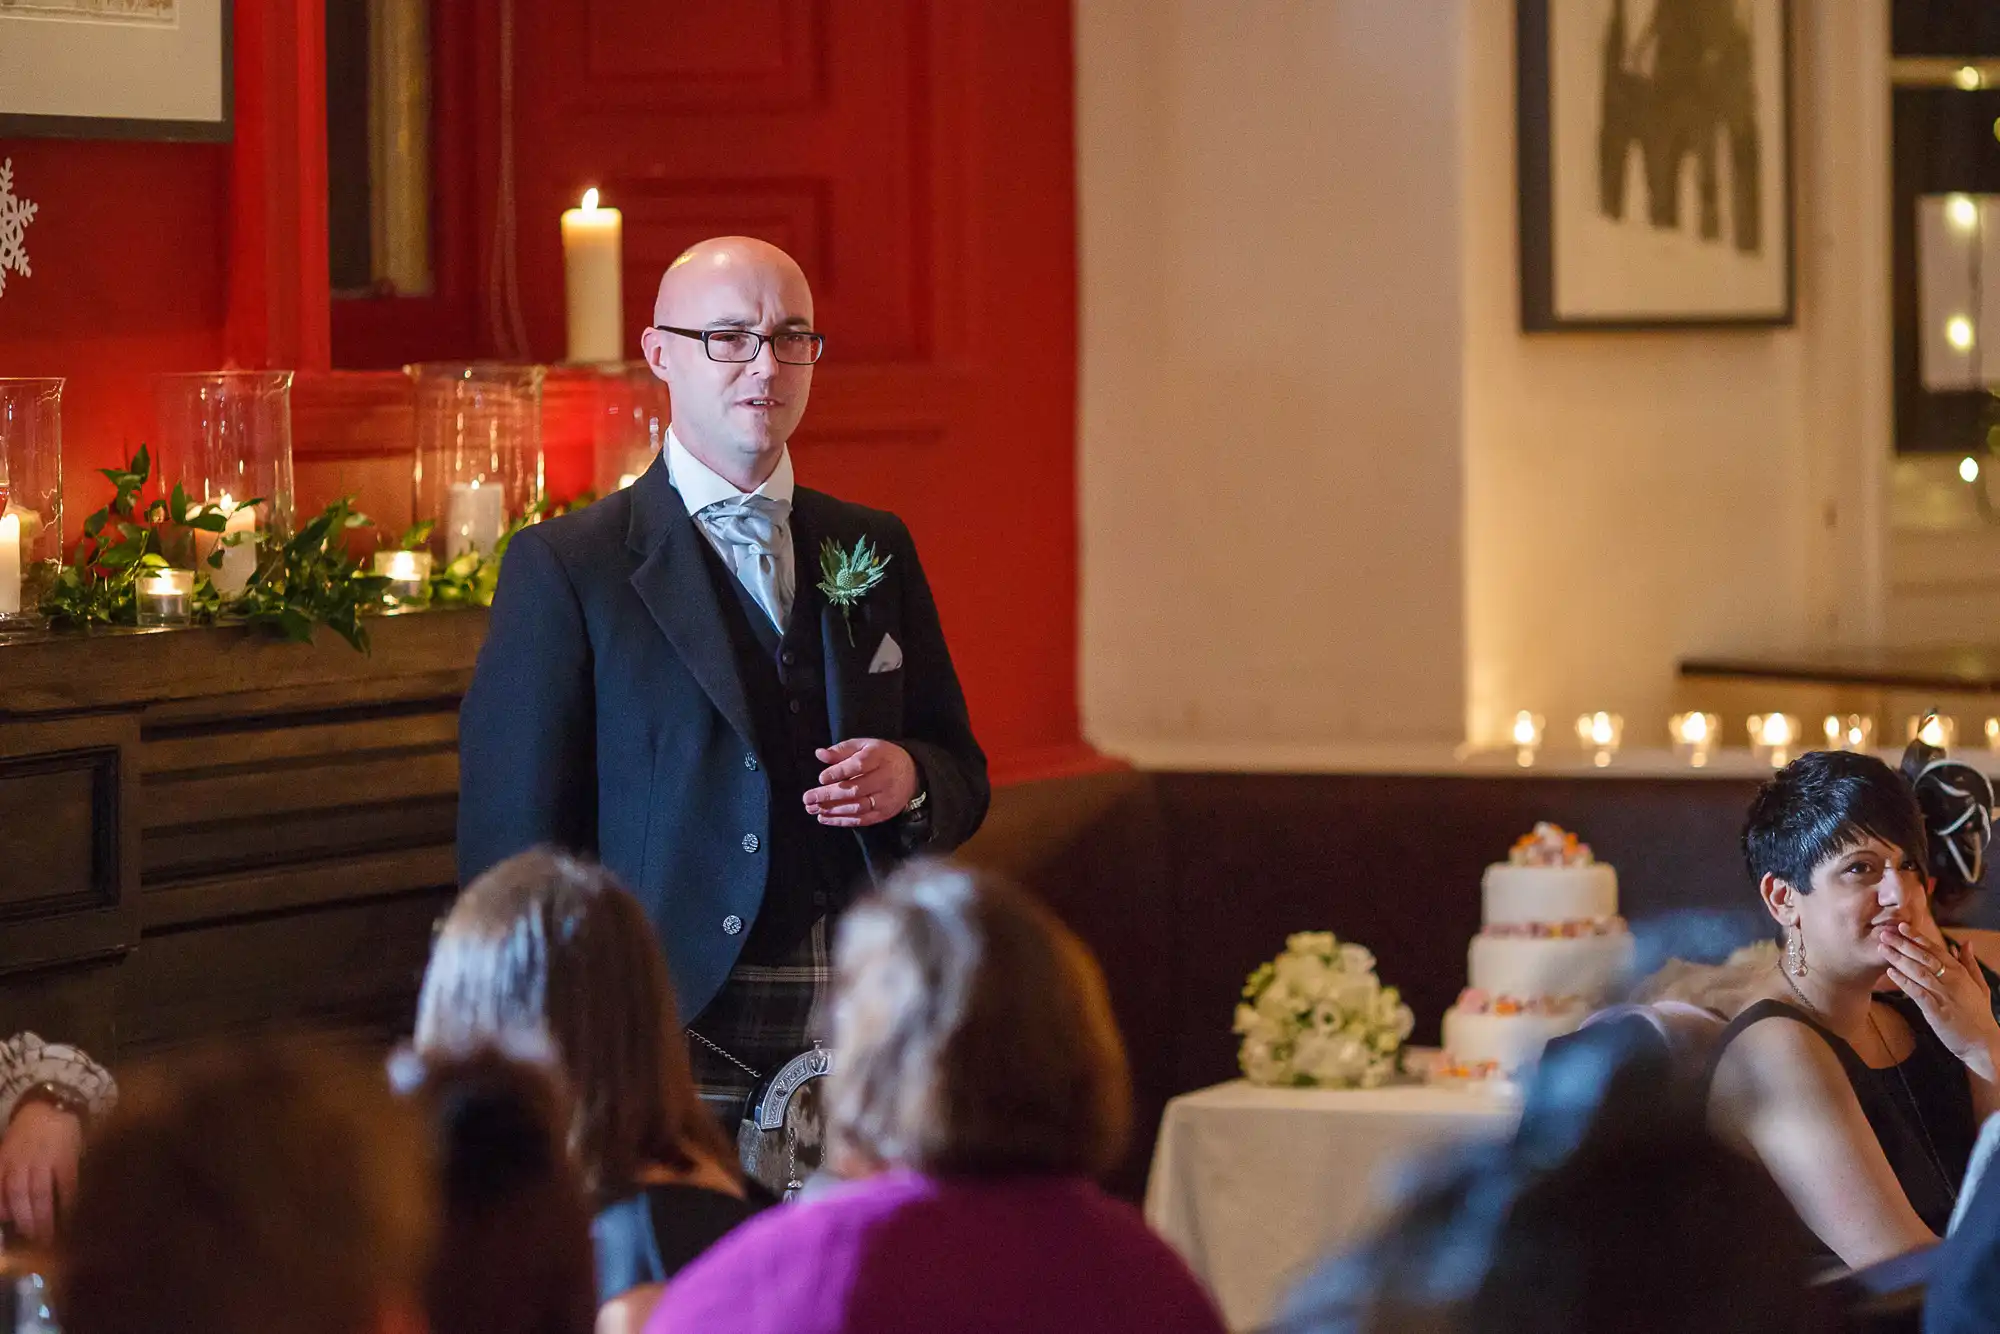 A bald man in a suit giving a speech at a wedding reception, holding a microphone, with a wedding cake and guests in the background.